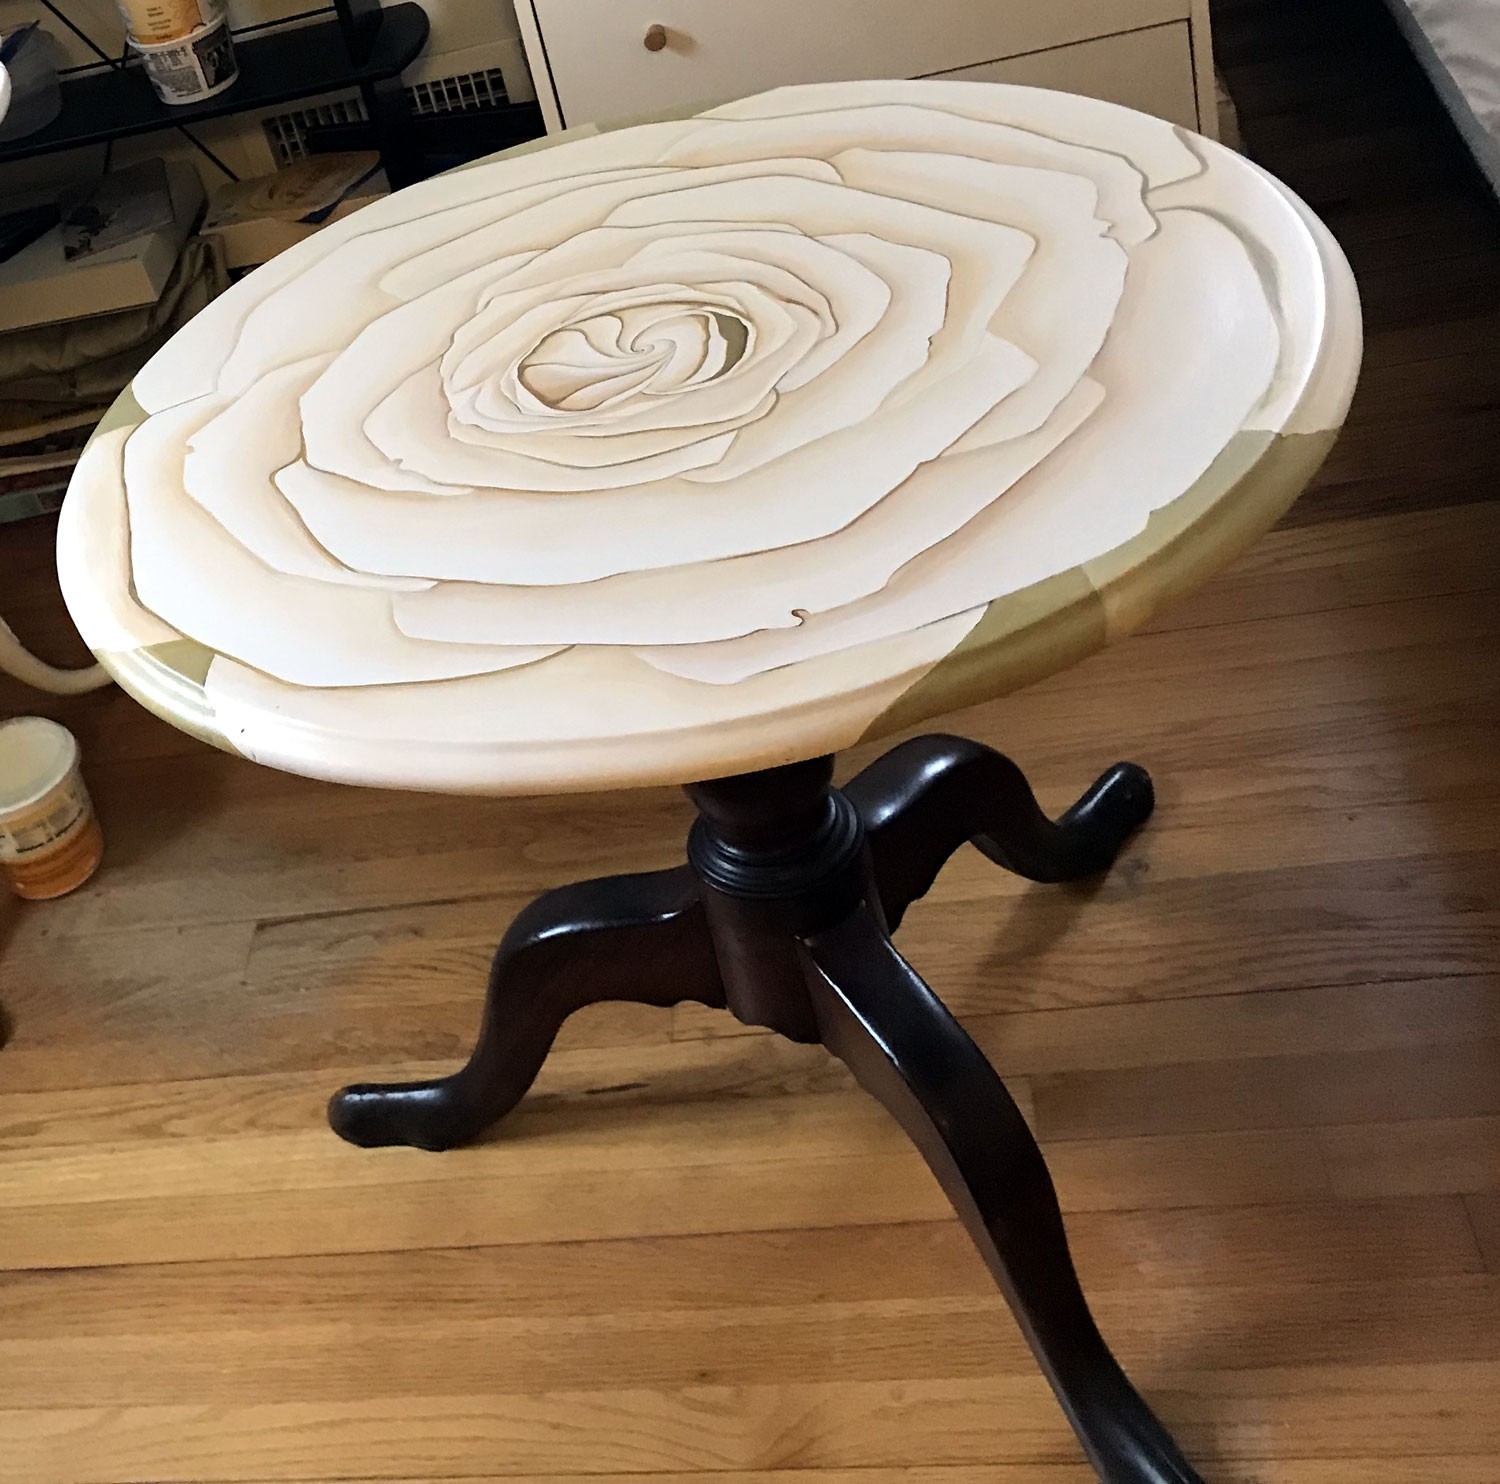 ROUND TABLE - ROSE